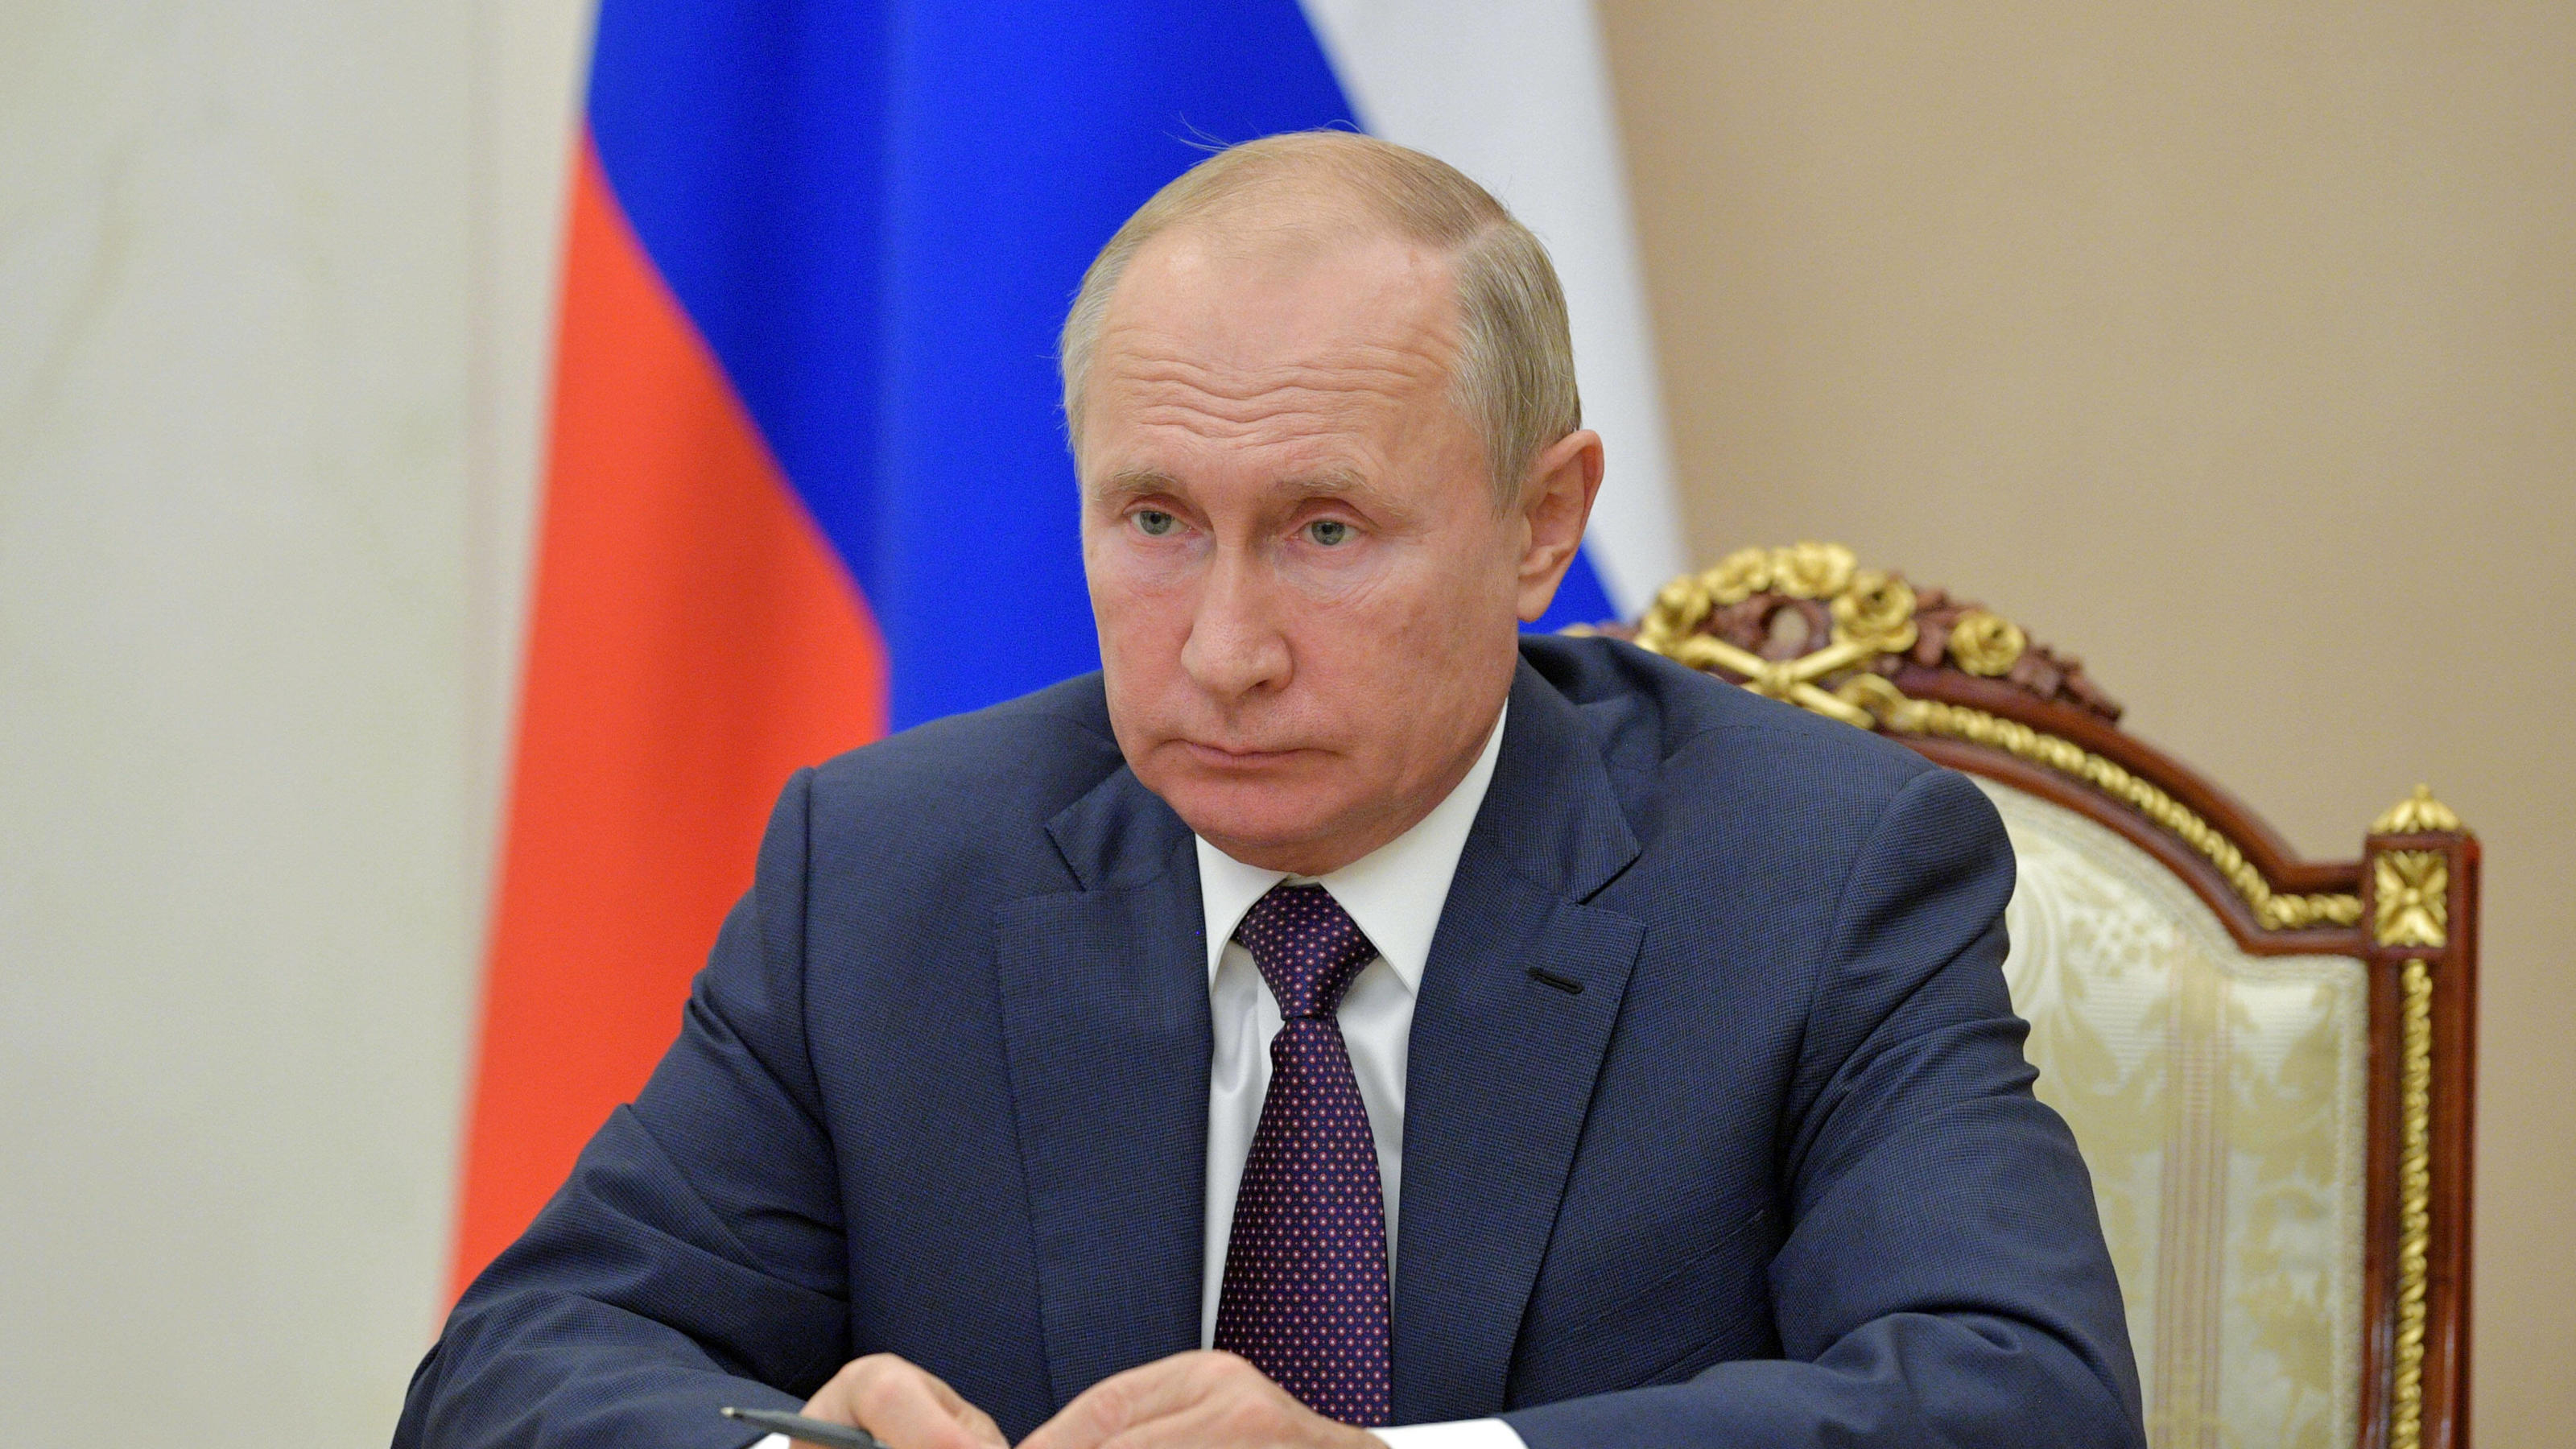 moscow-russia-november-23-2020-russia-s-president-vladimir-putin-r-during-a-video-conference-meeting-with-pskov.jpg